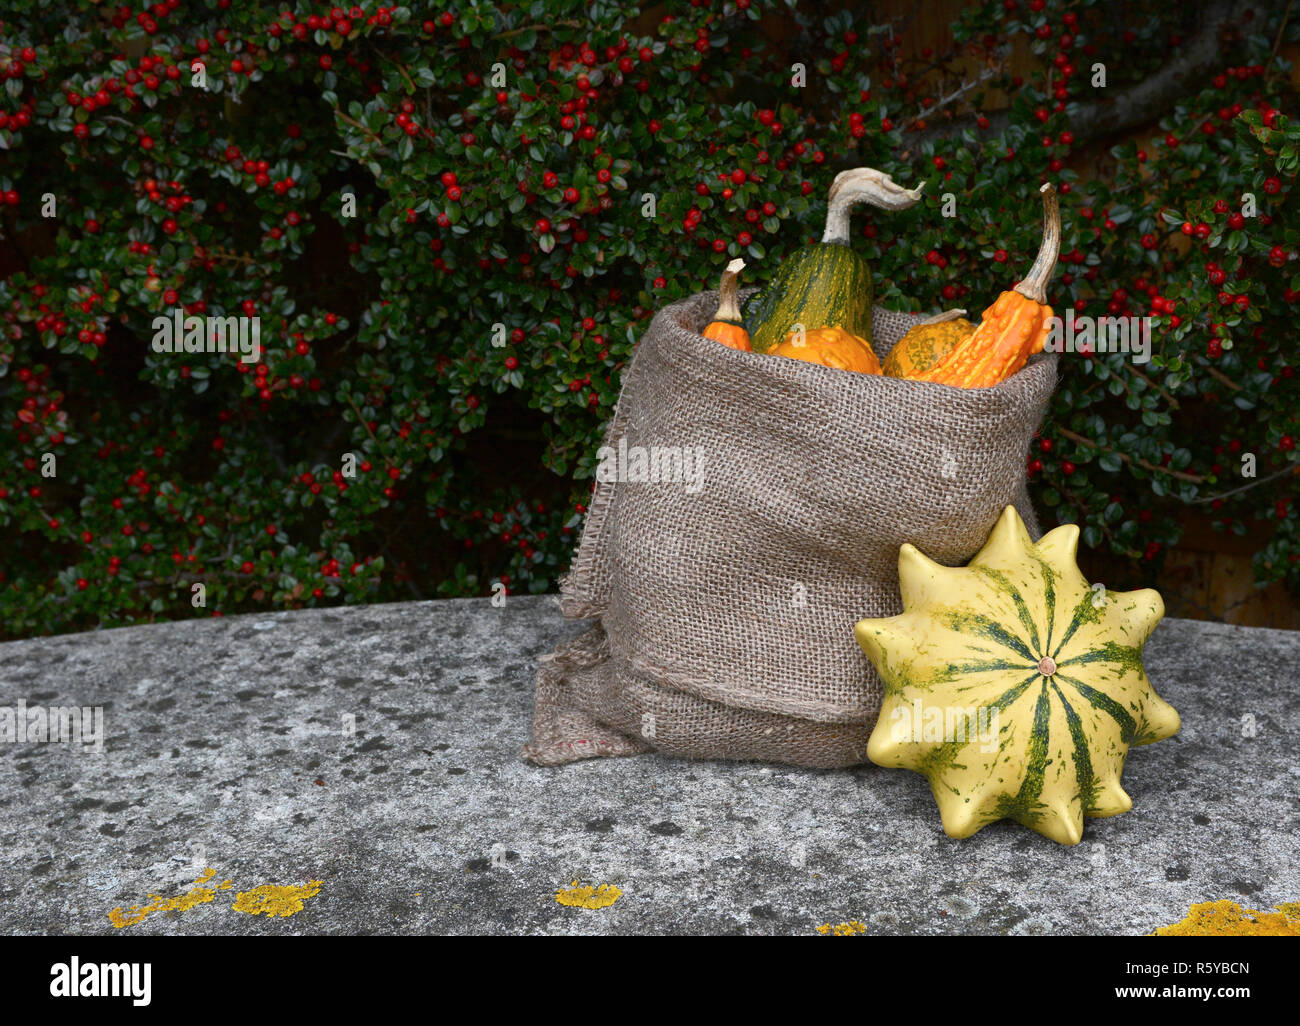 Full sack of ornamental gourds, with Crown of Thorns squash Stock Photo